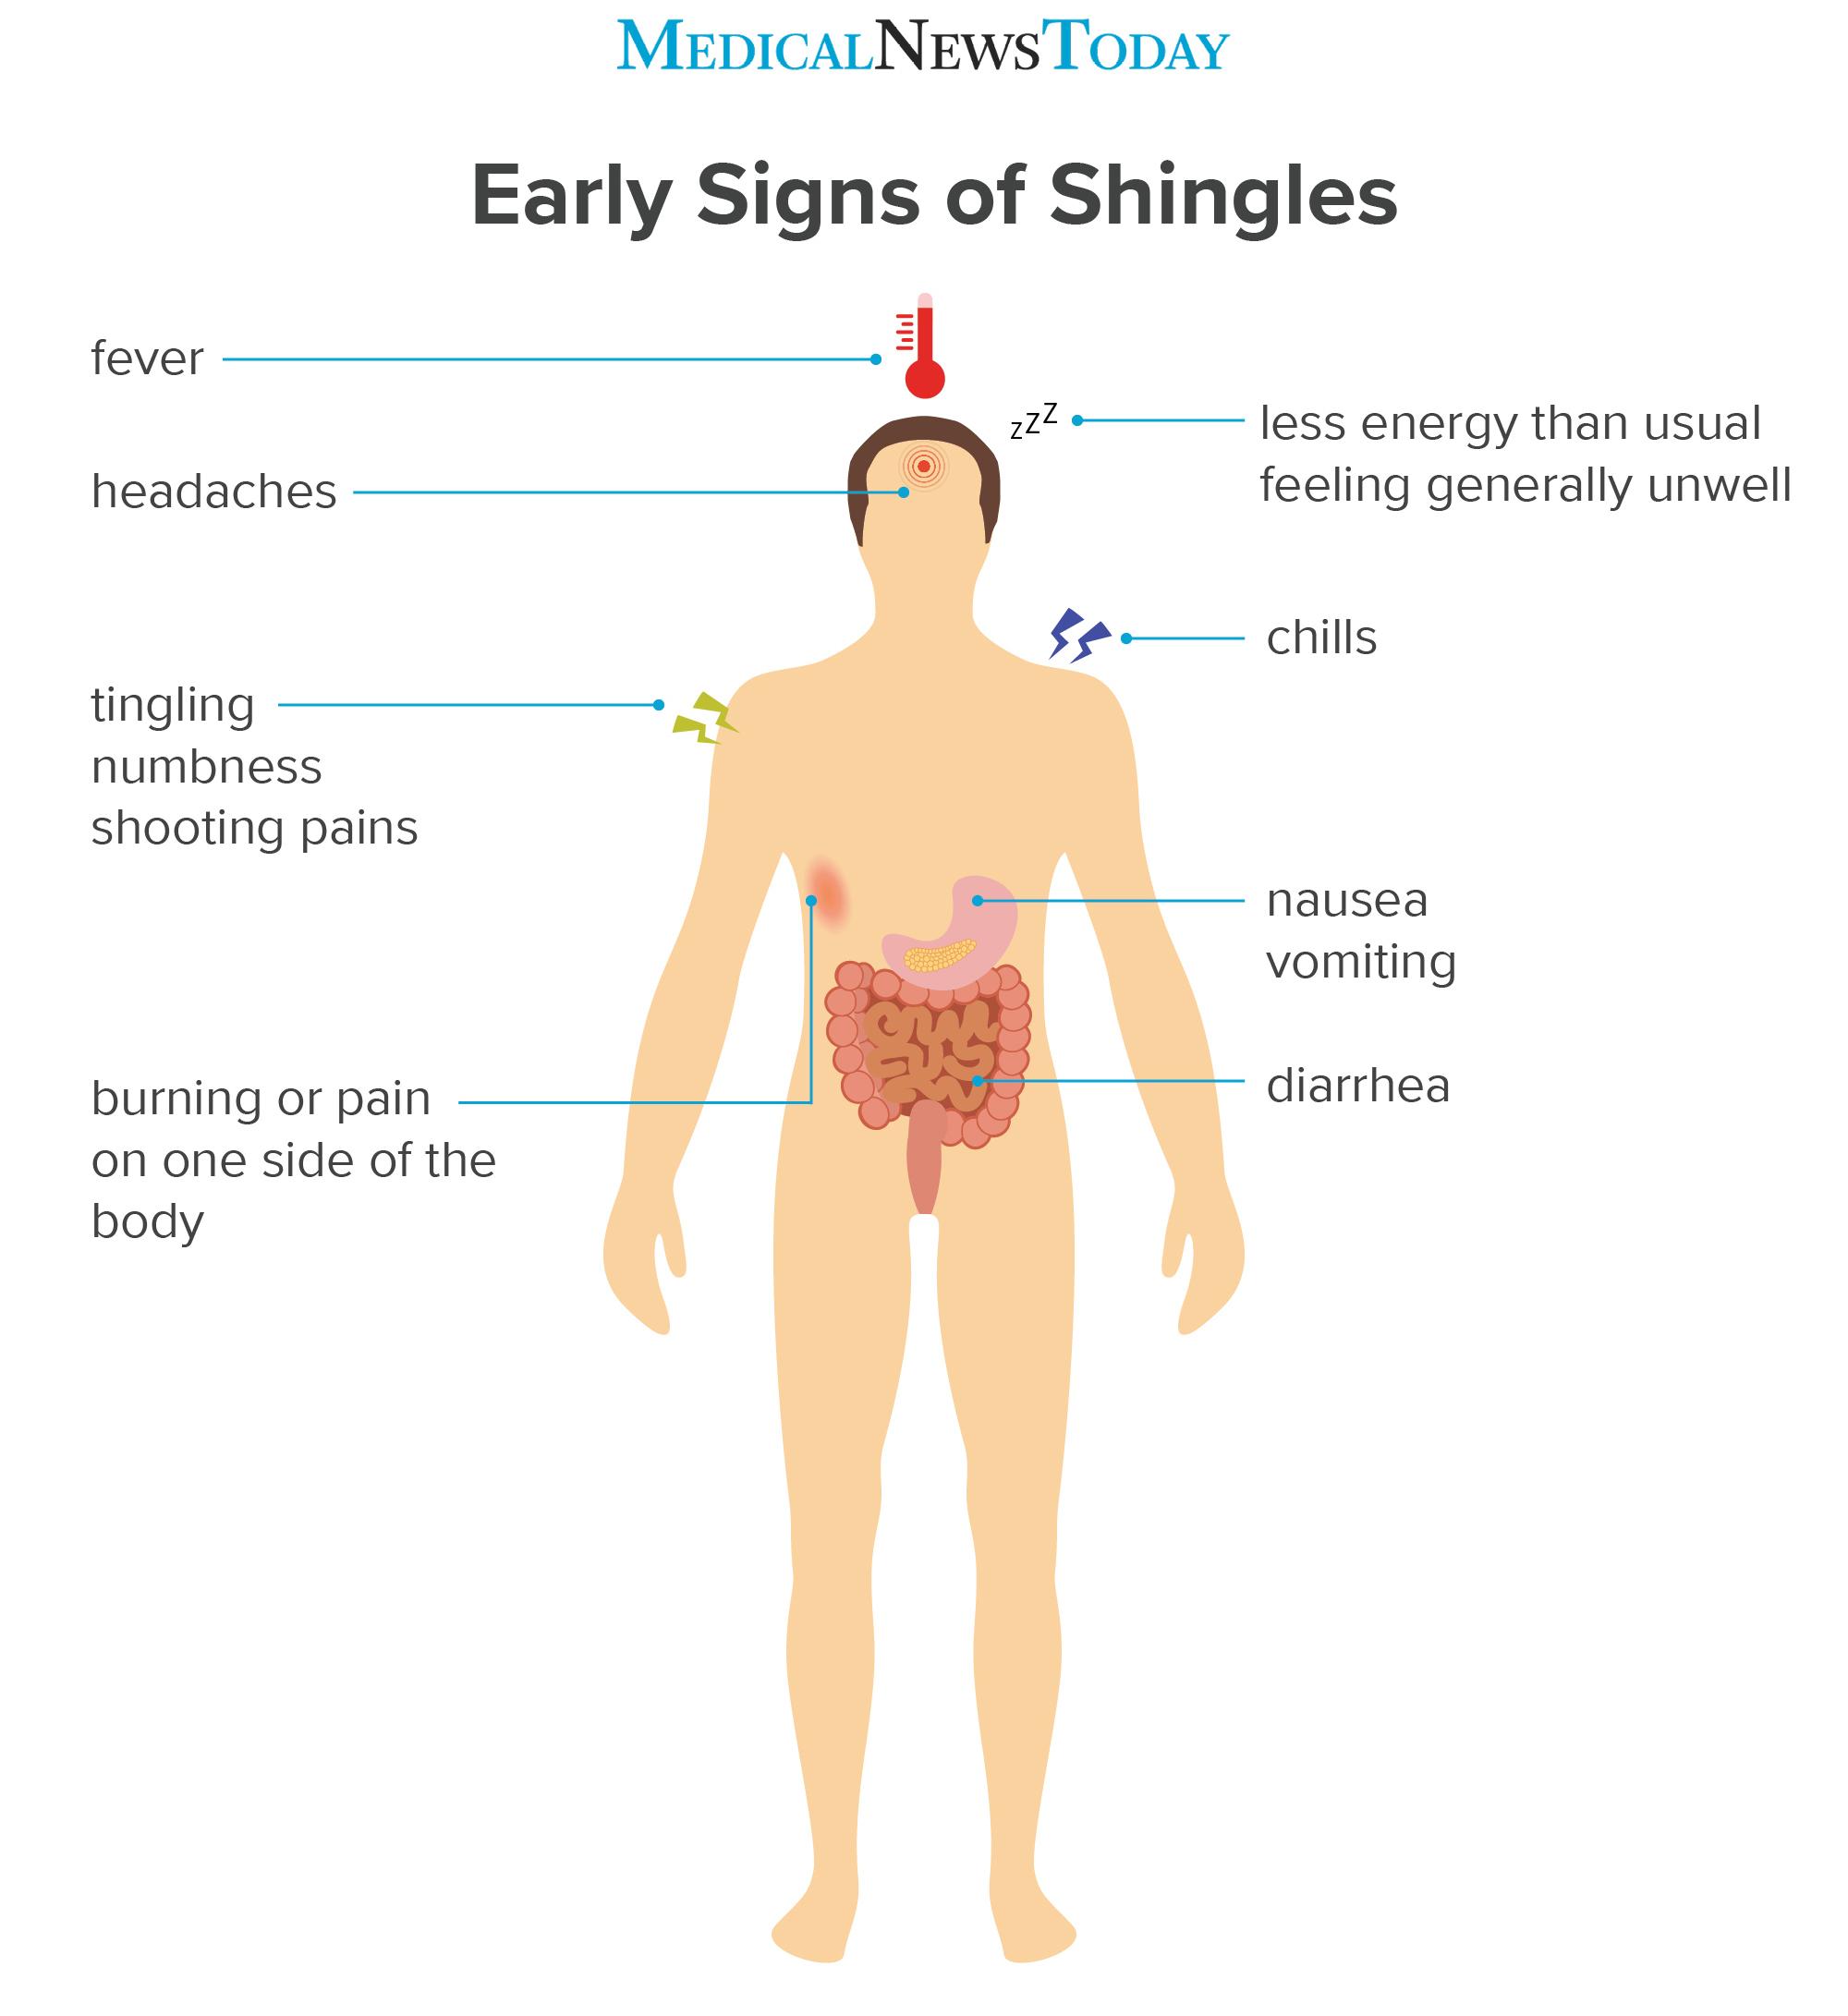 an infographic showing the early signs of shingles